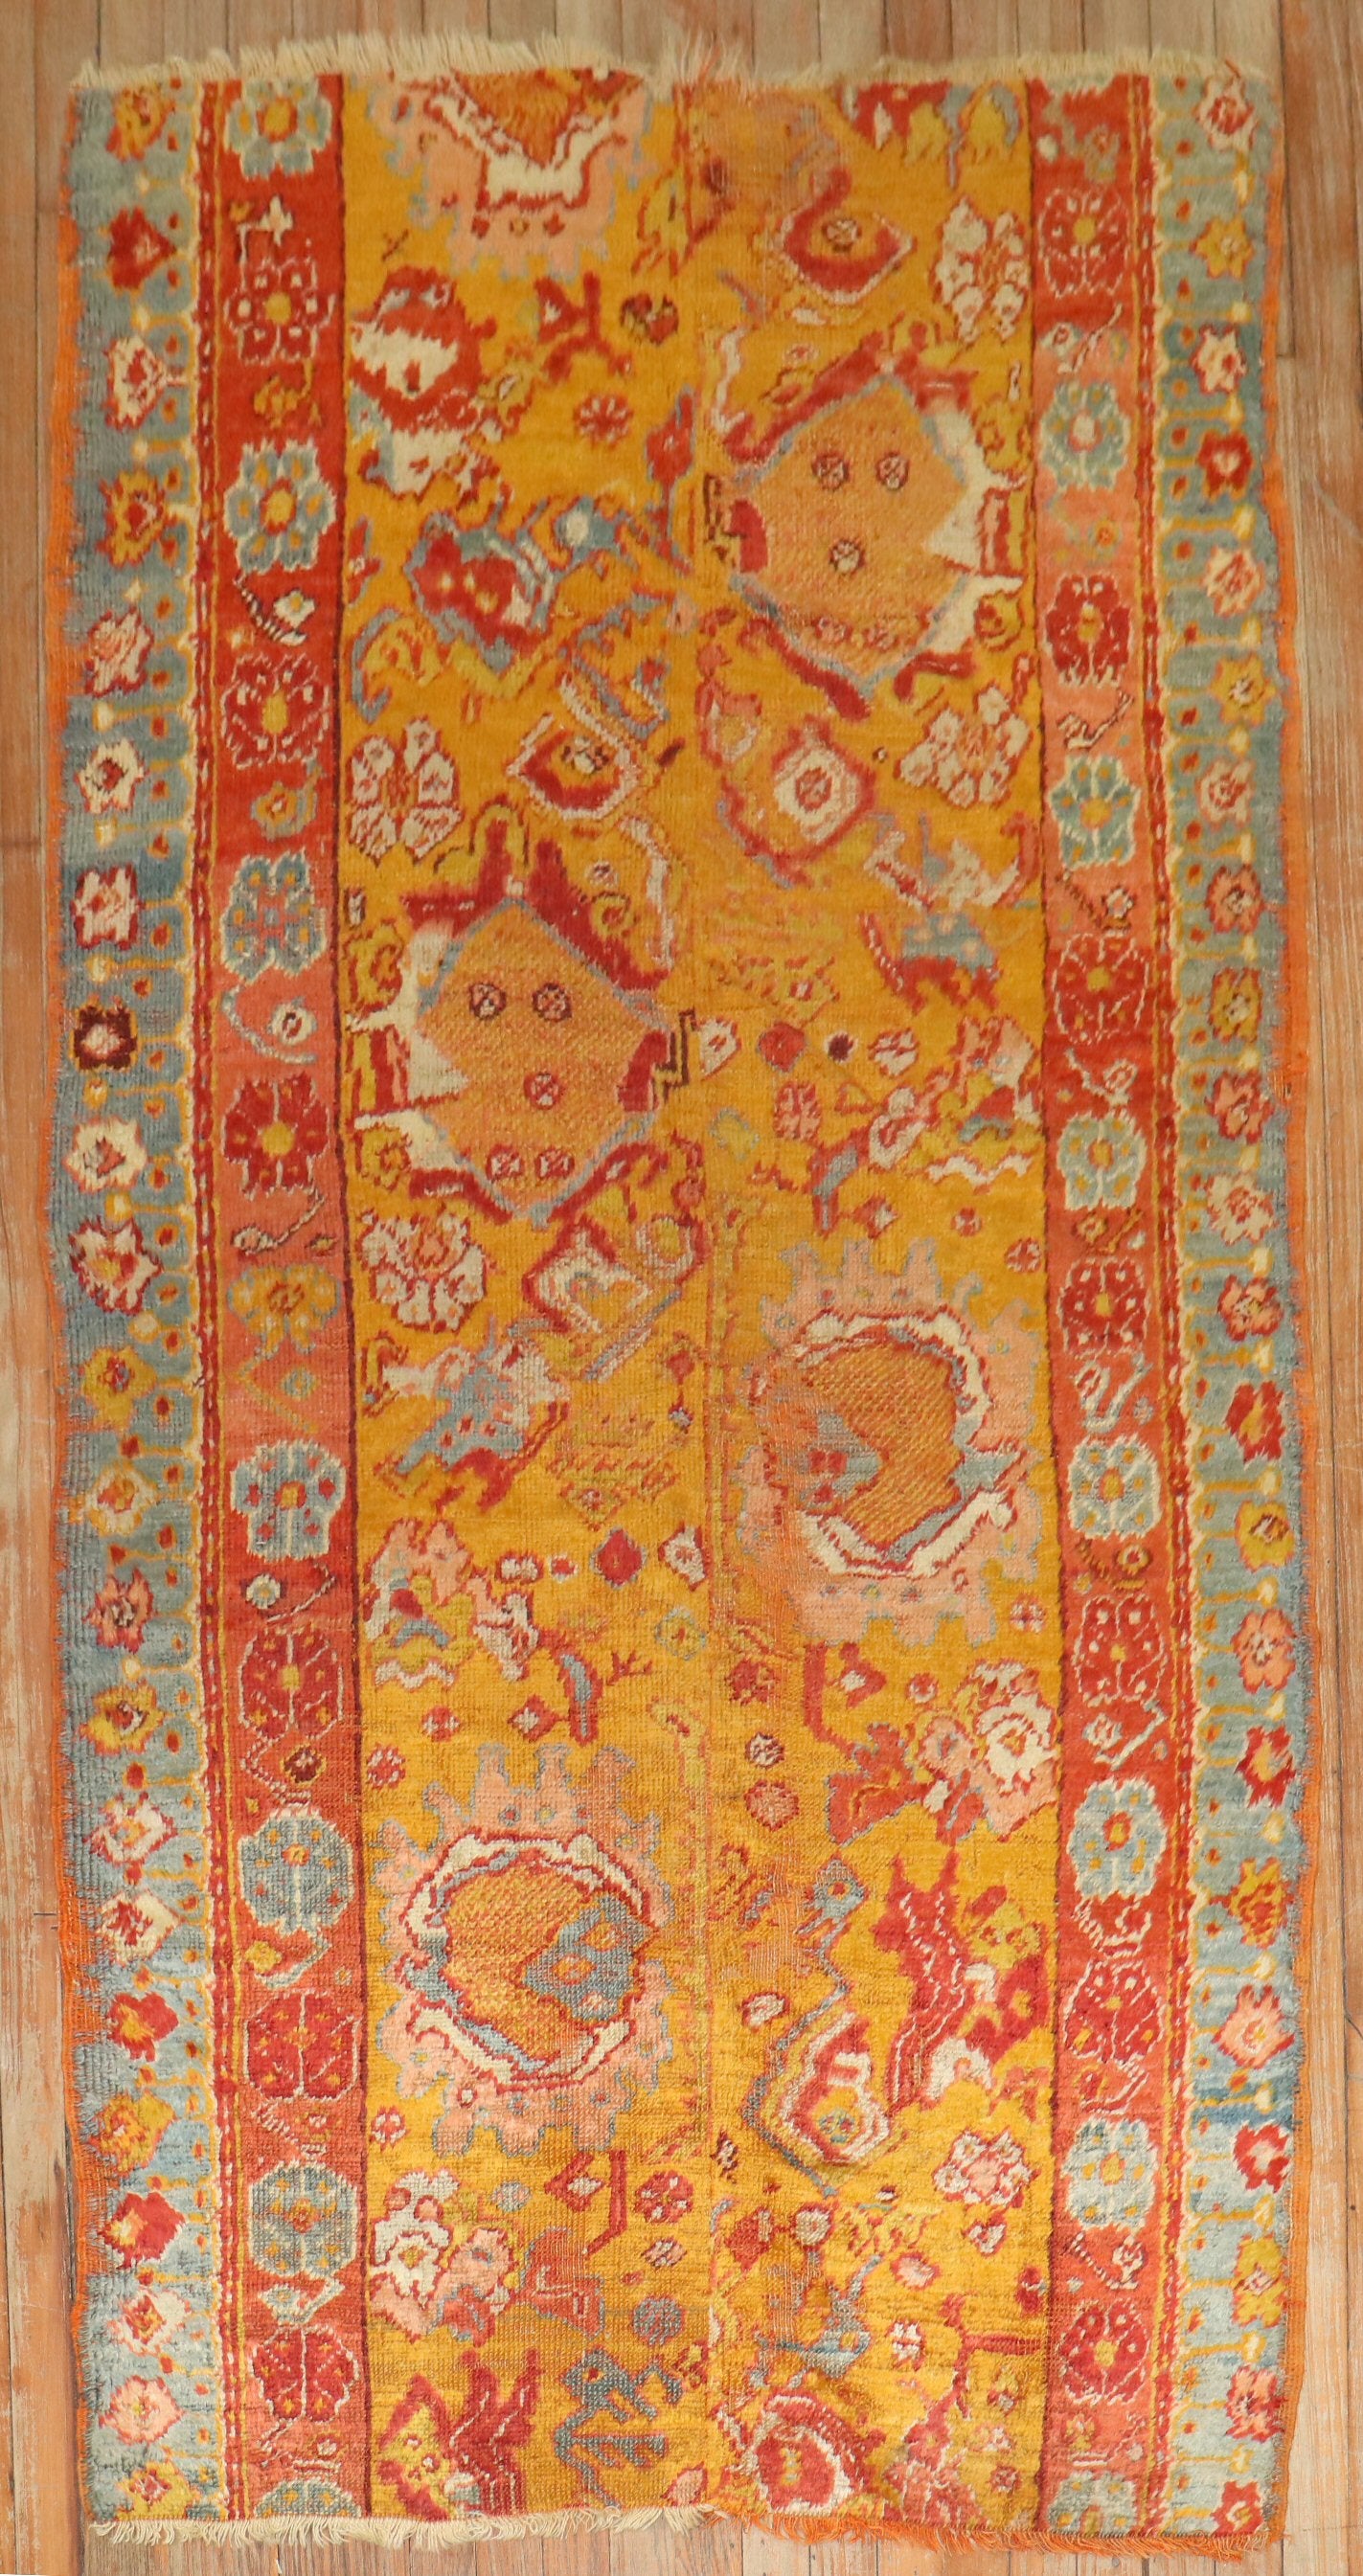 Late 19th century authentic Angora Oushak Small Fragment Rug

Measures: 3'7'' x 6'7''

Oushak rugs are prized for their rich looks as well as for their high quality and exceptional beauty, which makes them excellent decorative pieces. The ones made